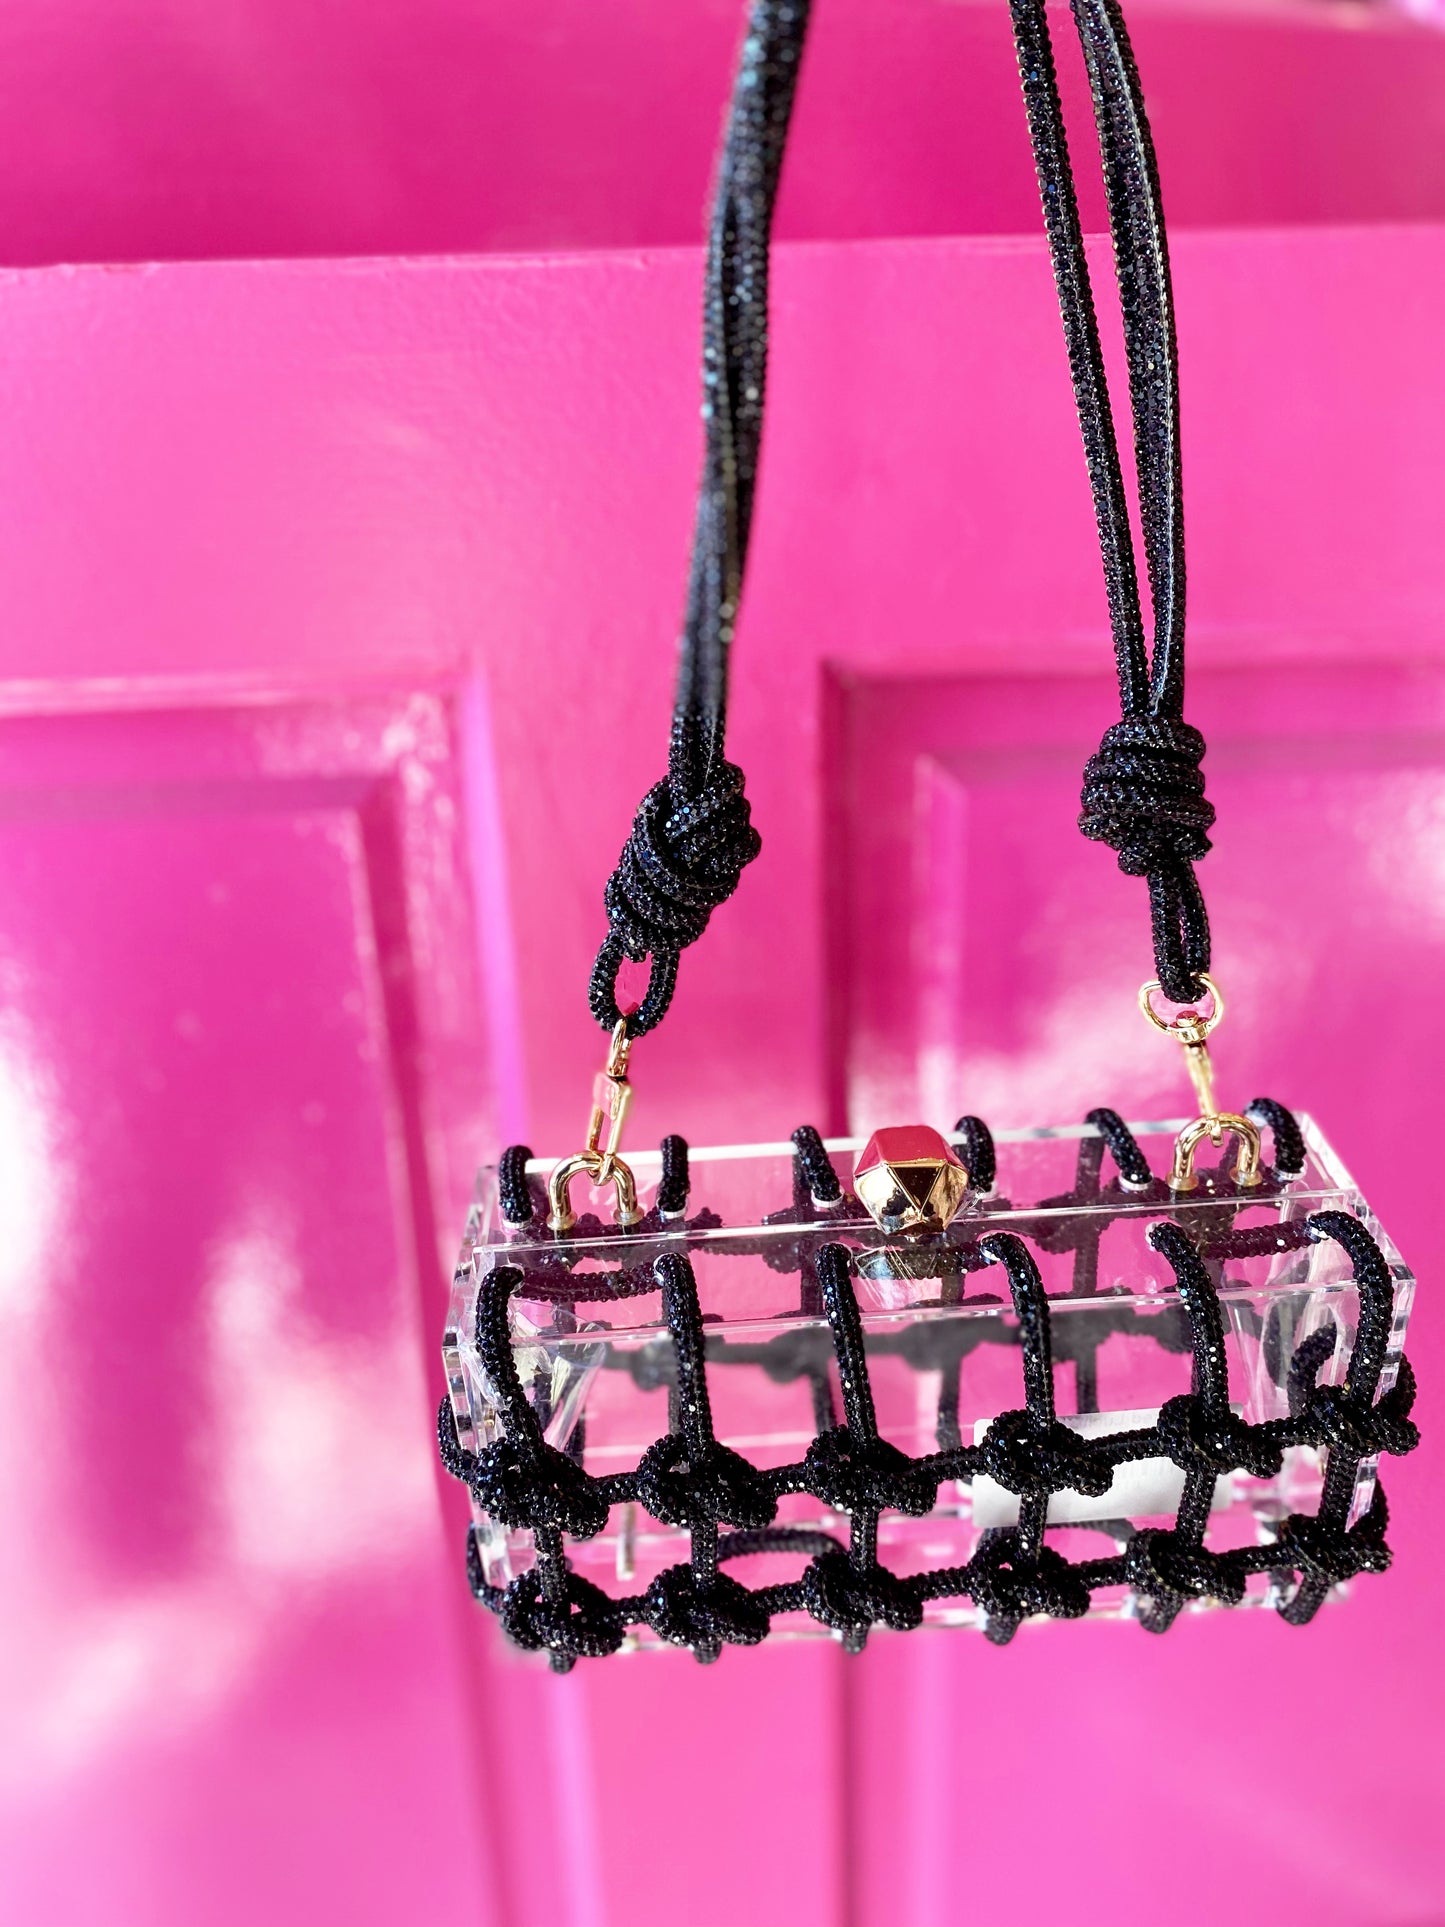 Caged Lucite Bag